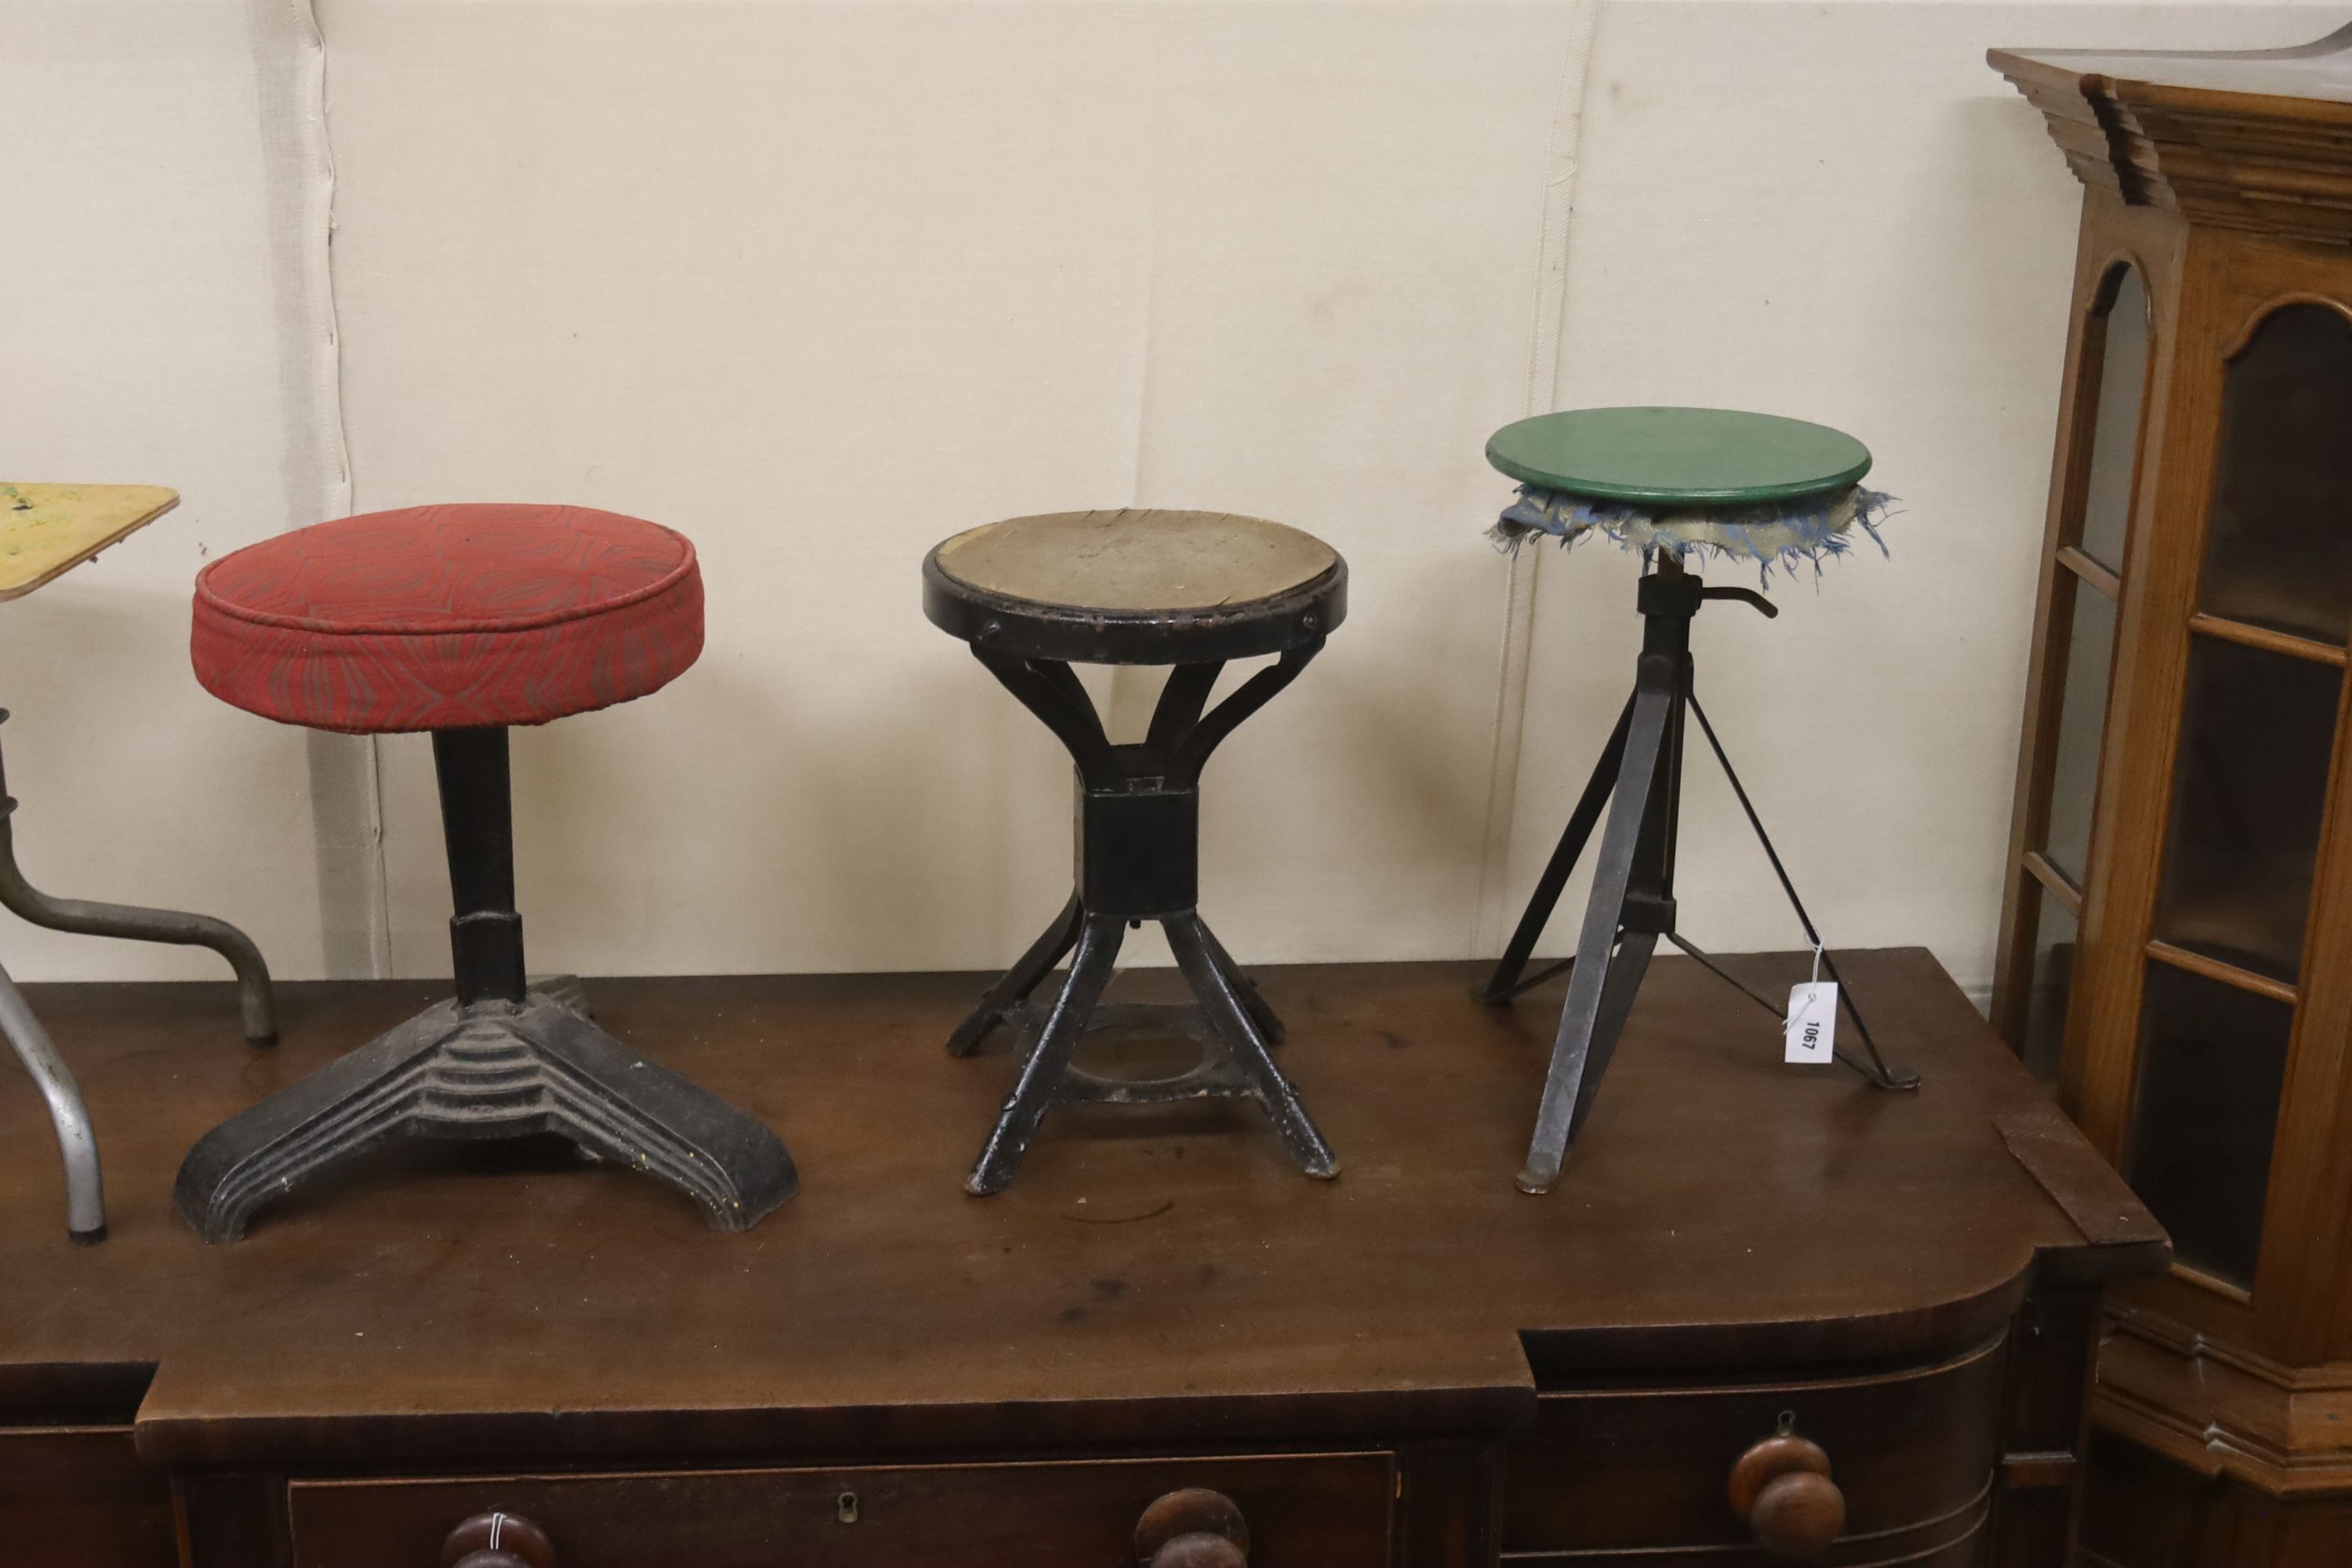 Four industrial style stools